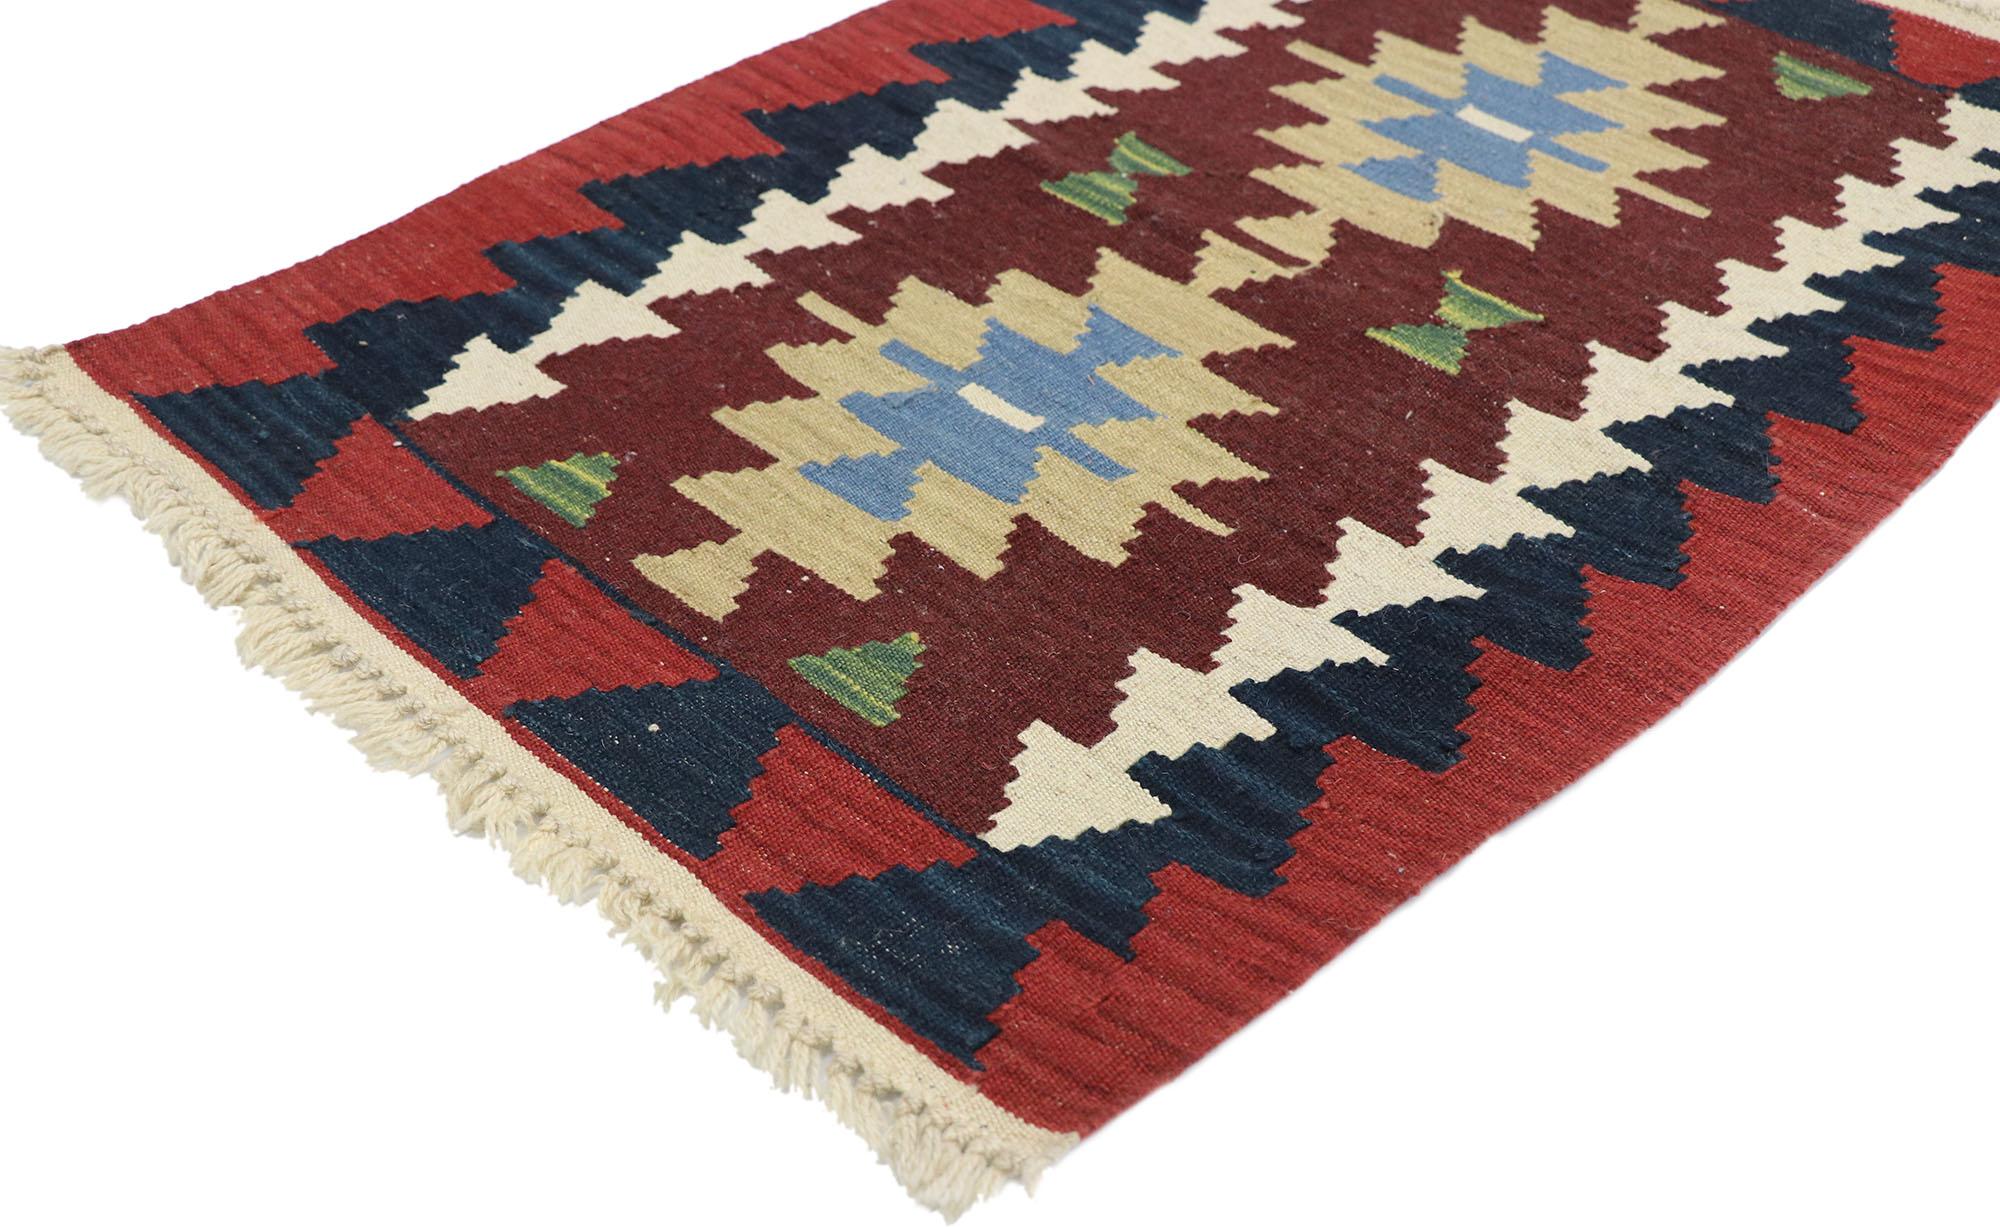 77910 vintage Persian Shiraz Kilim rug with Modern Tribal style 02'00 x 02'11. Full of tiny details and a bold expressive design combined with vibrant colors and tribal style, this hand-woven wool vintage Persian Shiraz kilim rug is a captivating